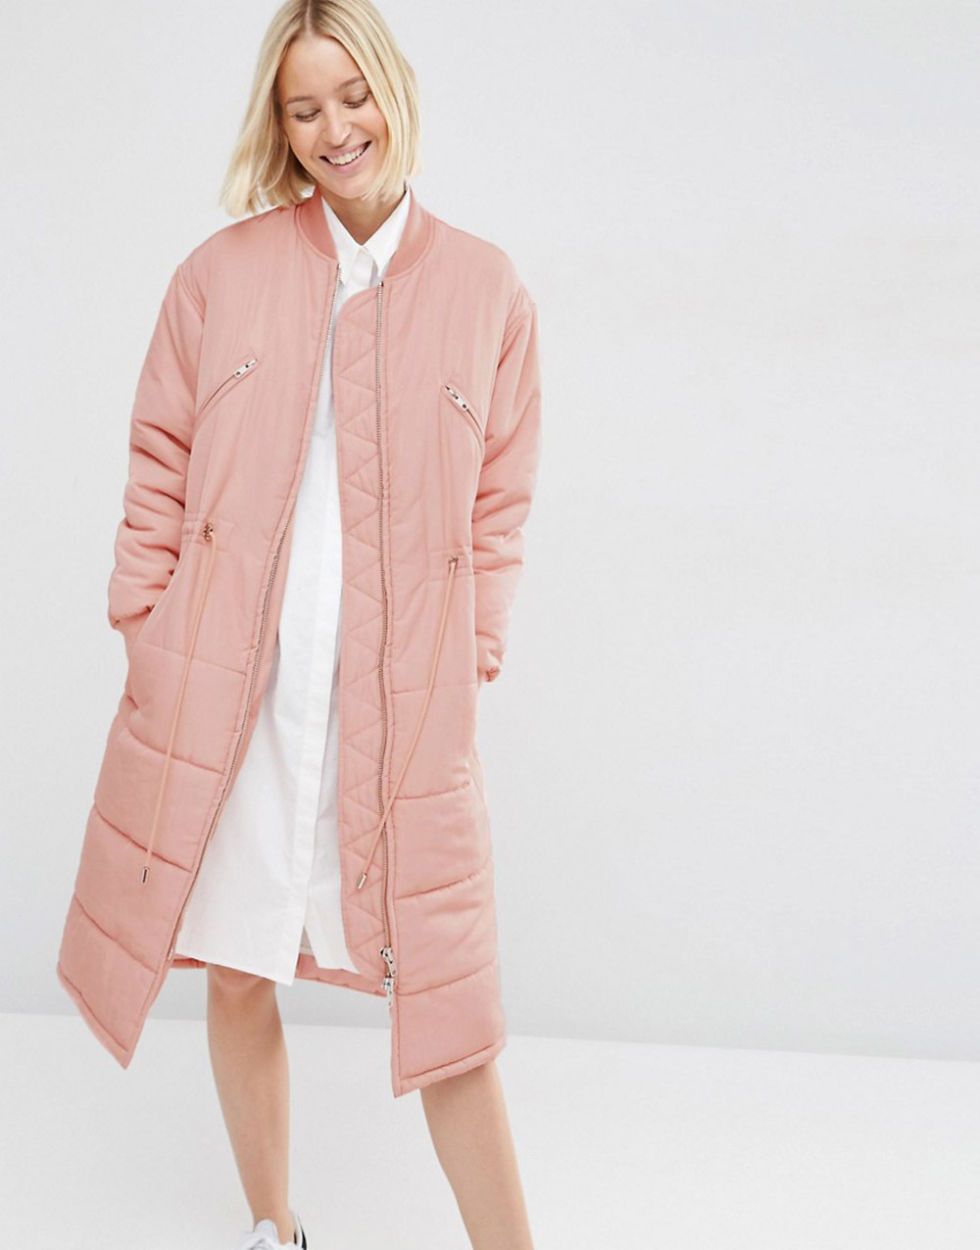 <p>Long quilted coat, £110, <a href="http://www.asos.com/asos-white/asos-white-quilted-longline-parka/prod/pgeproduct.aspx?iid=6572199&clr=Blush&SearchQuery=&cid=2623&pgesize=21&pge=0&totalstyles=21&gridsize=3&gridrow=4&gridcolumn=2" target="_blank">ASOS White</a></p>